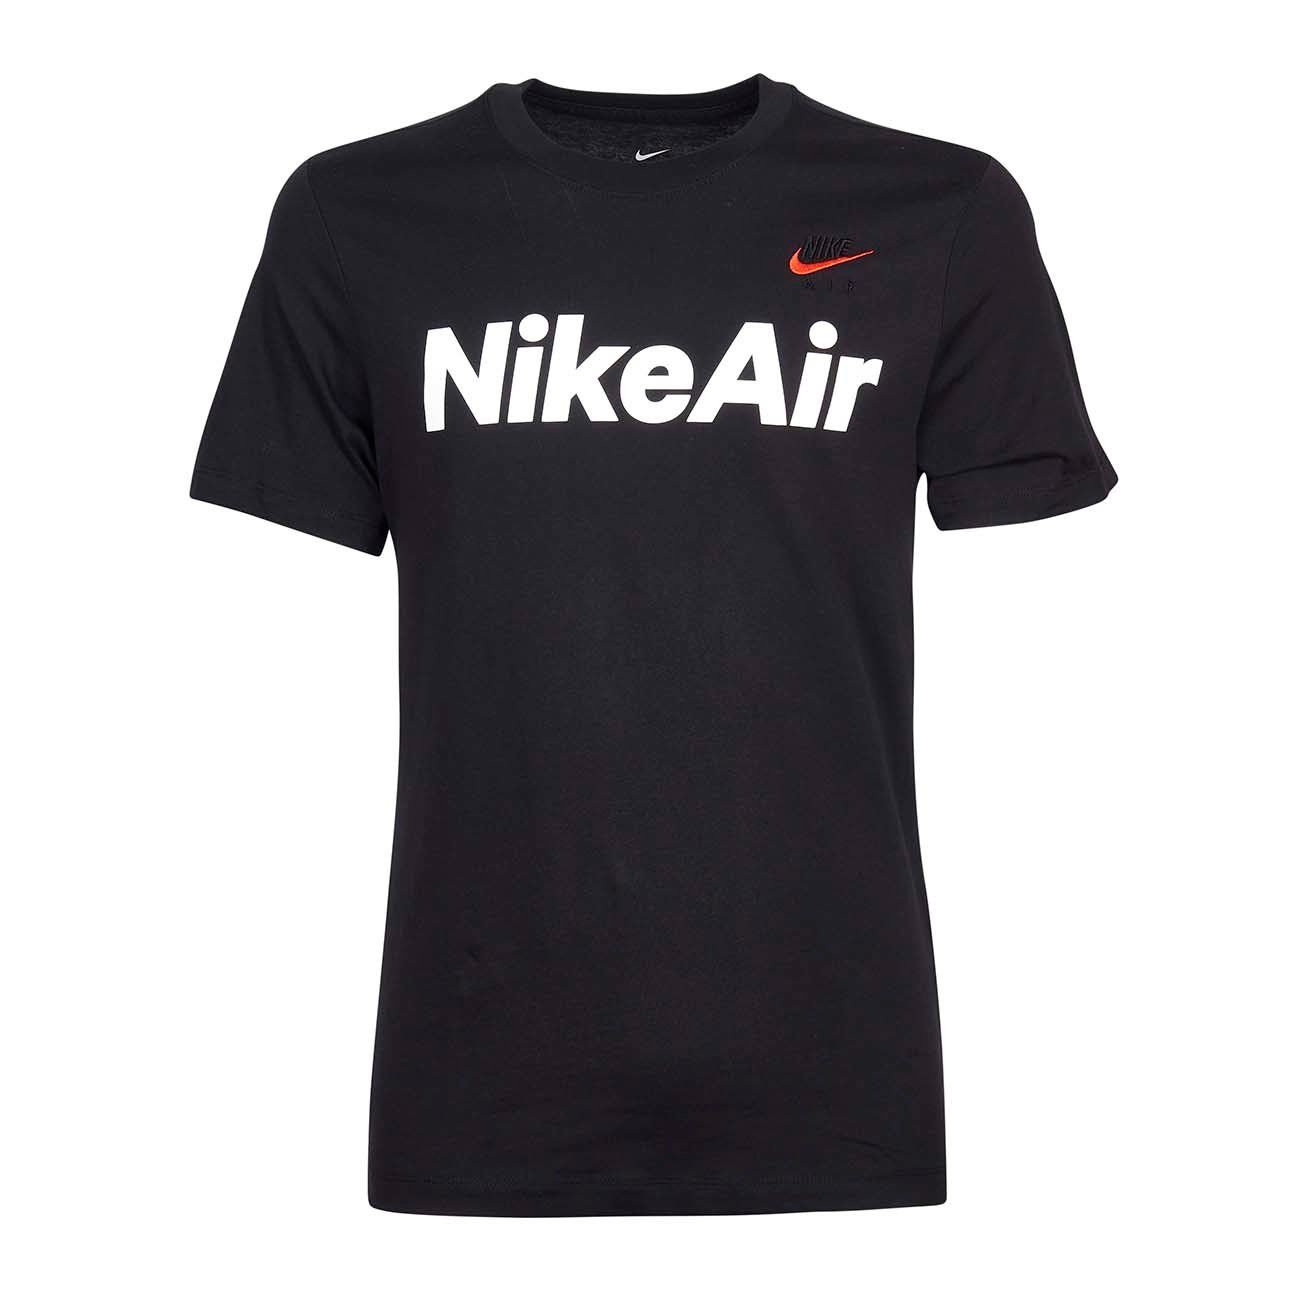 NIKE T-SHIRT WITH NIKE AIR LETTERING AND EMBROIDERED LOGO Man Black Red ...